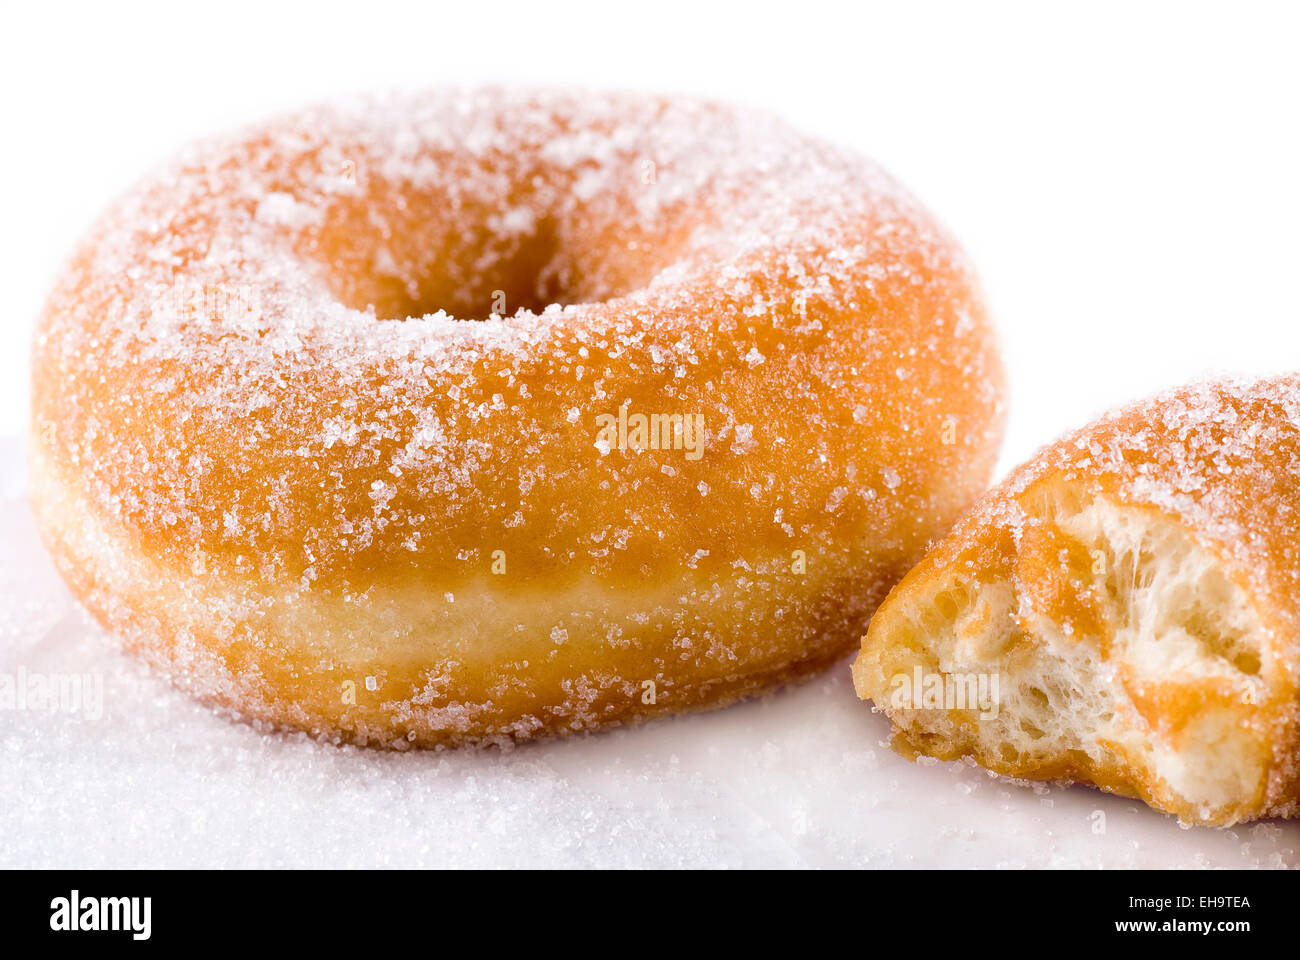 Sugar donut on greaseproof paper. Stock Photo